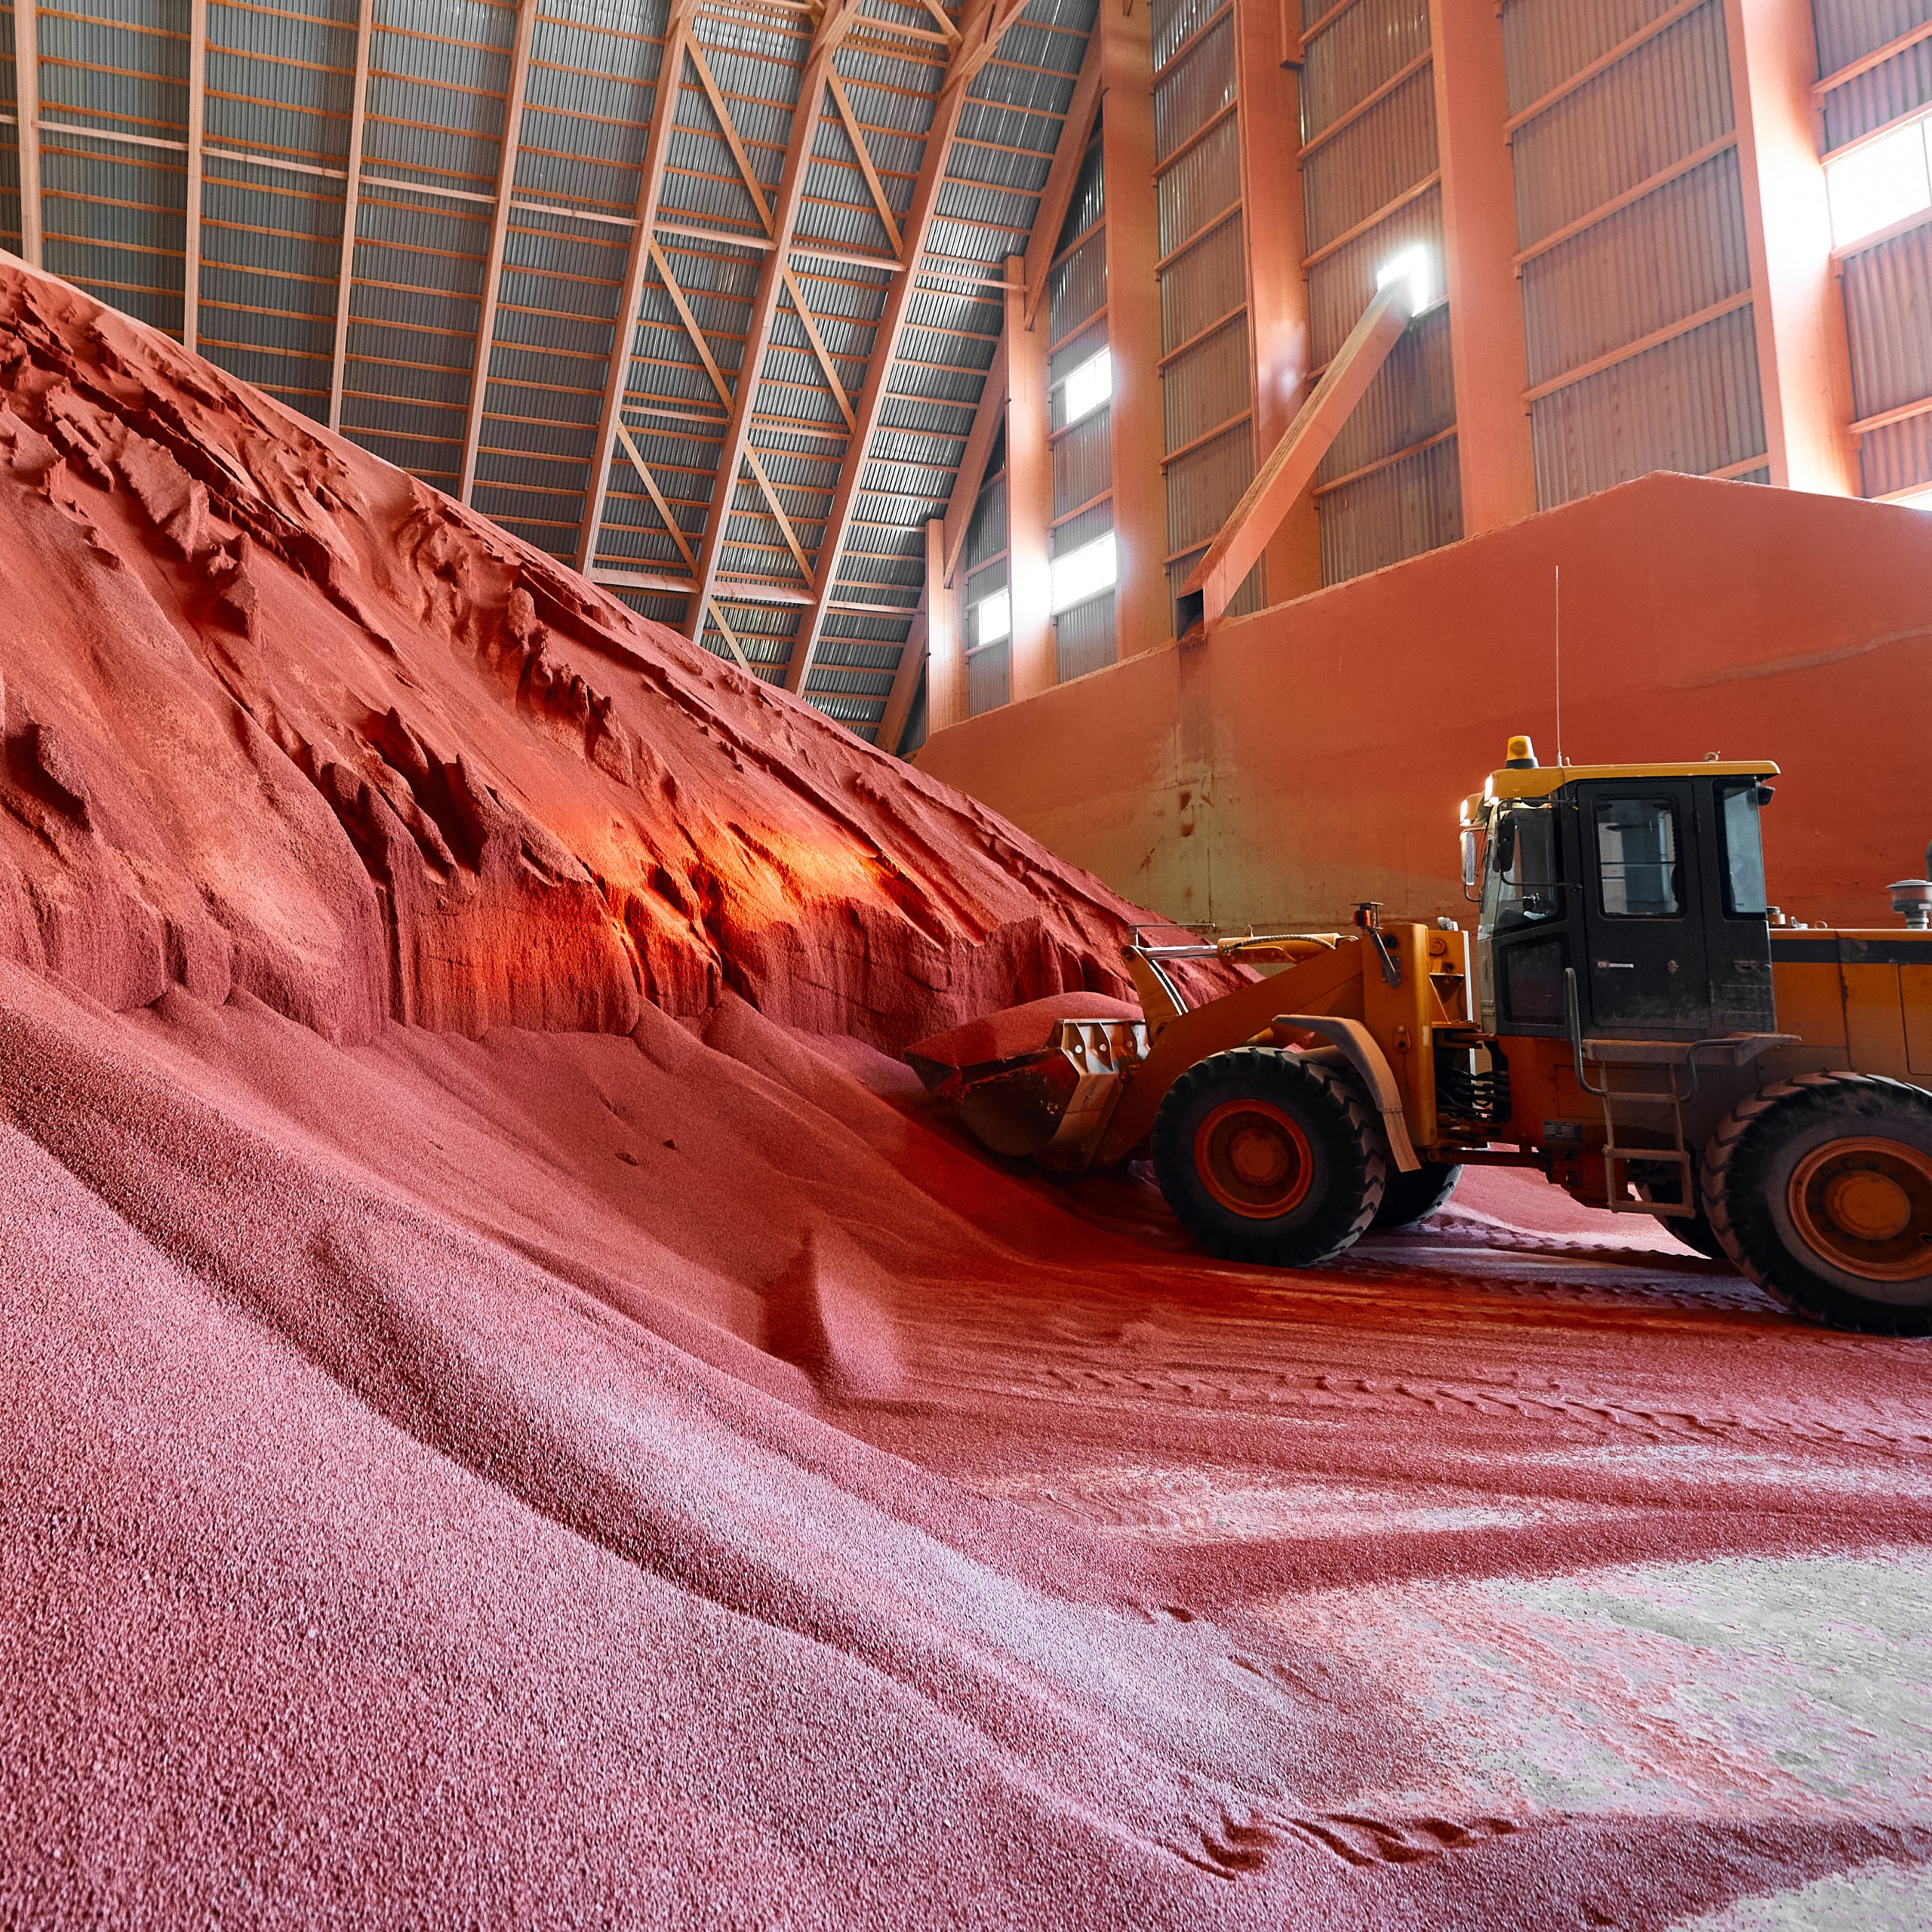 Excavator collects red potassium agricultural fertilizers in warehouse. Prepare chemical plant products for packaging. Mineral salt materials